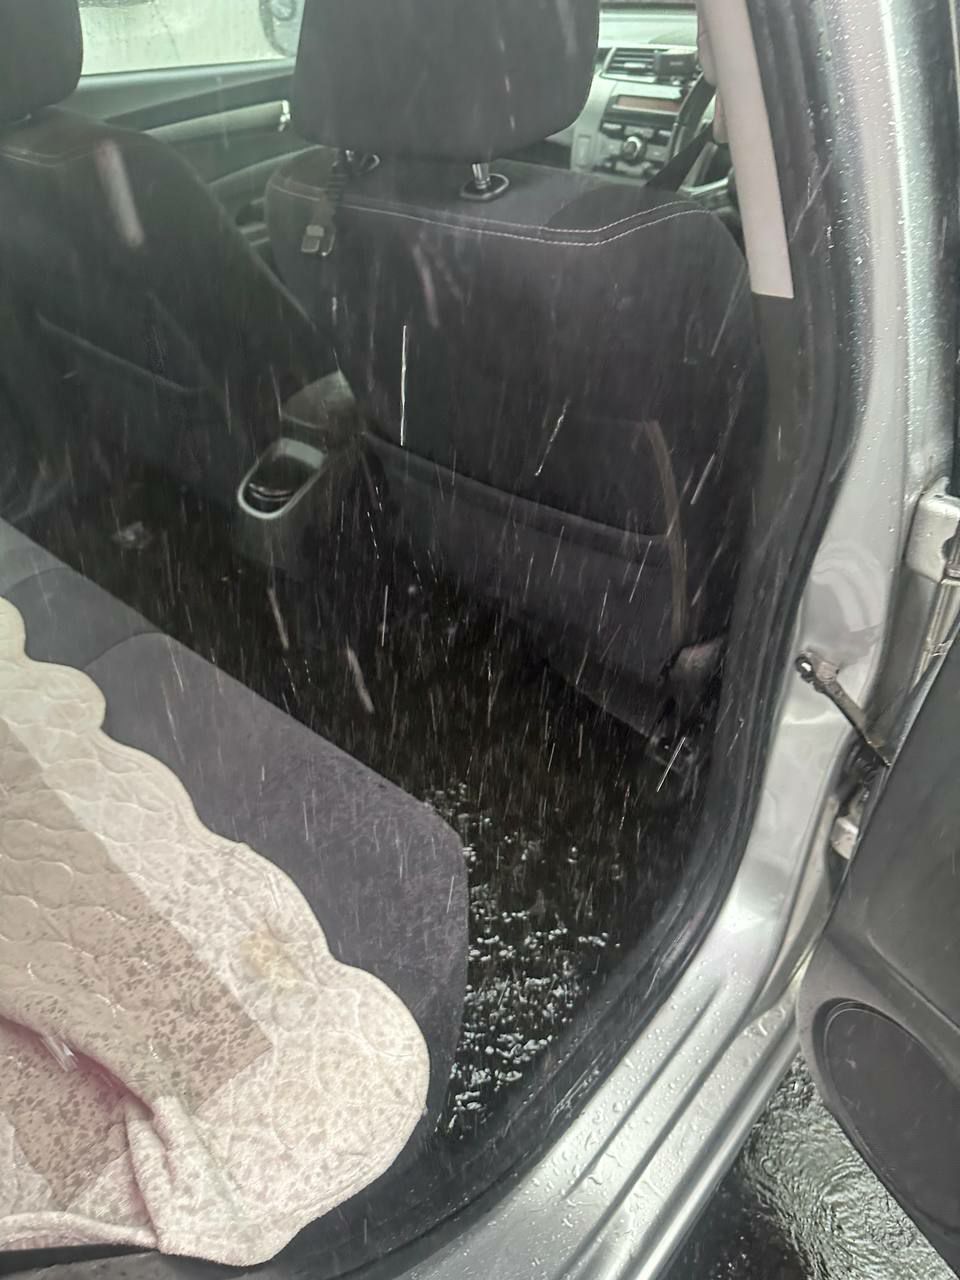 Car soaked with water